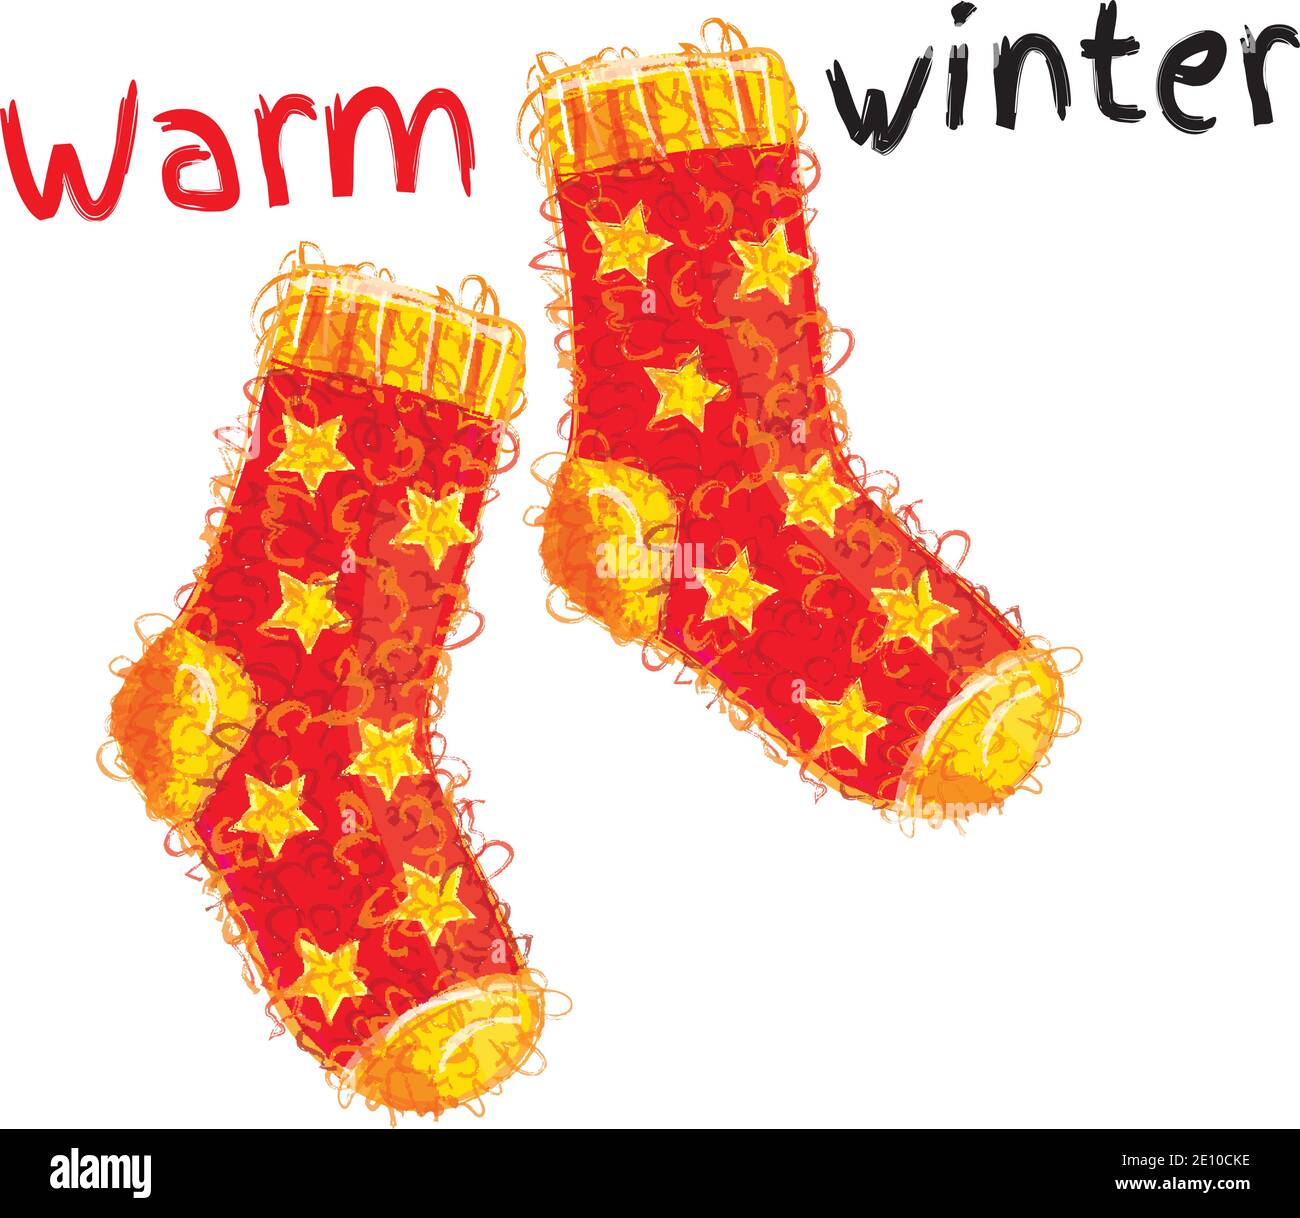 Warm winter woolen red socks with yellow stars Stock Vector